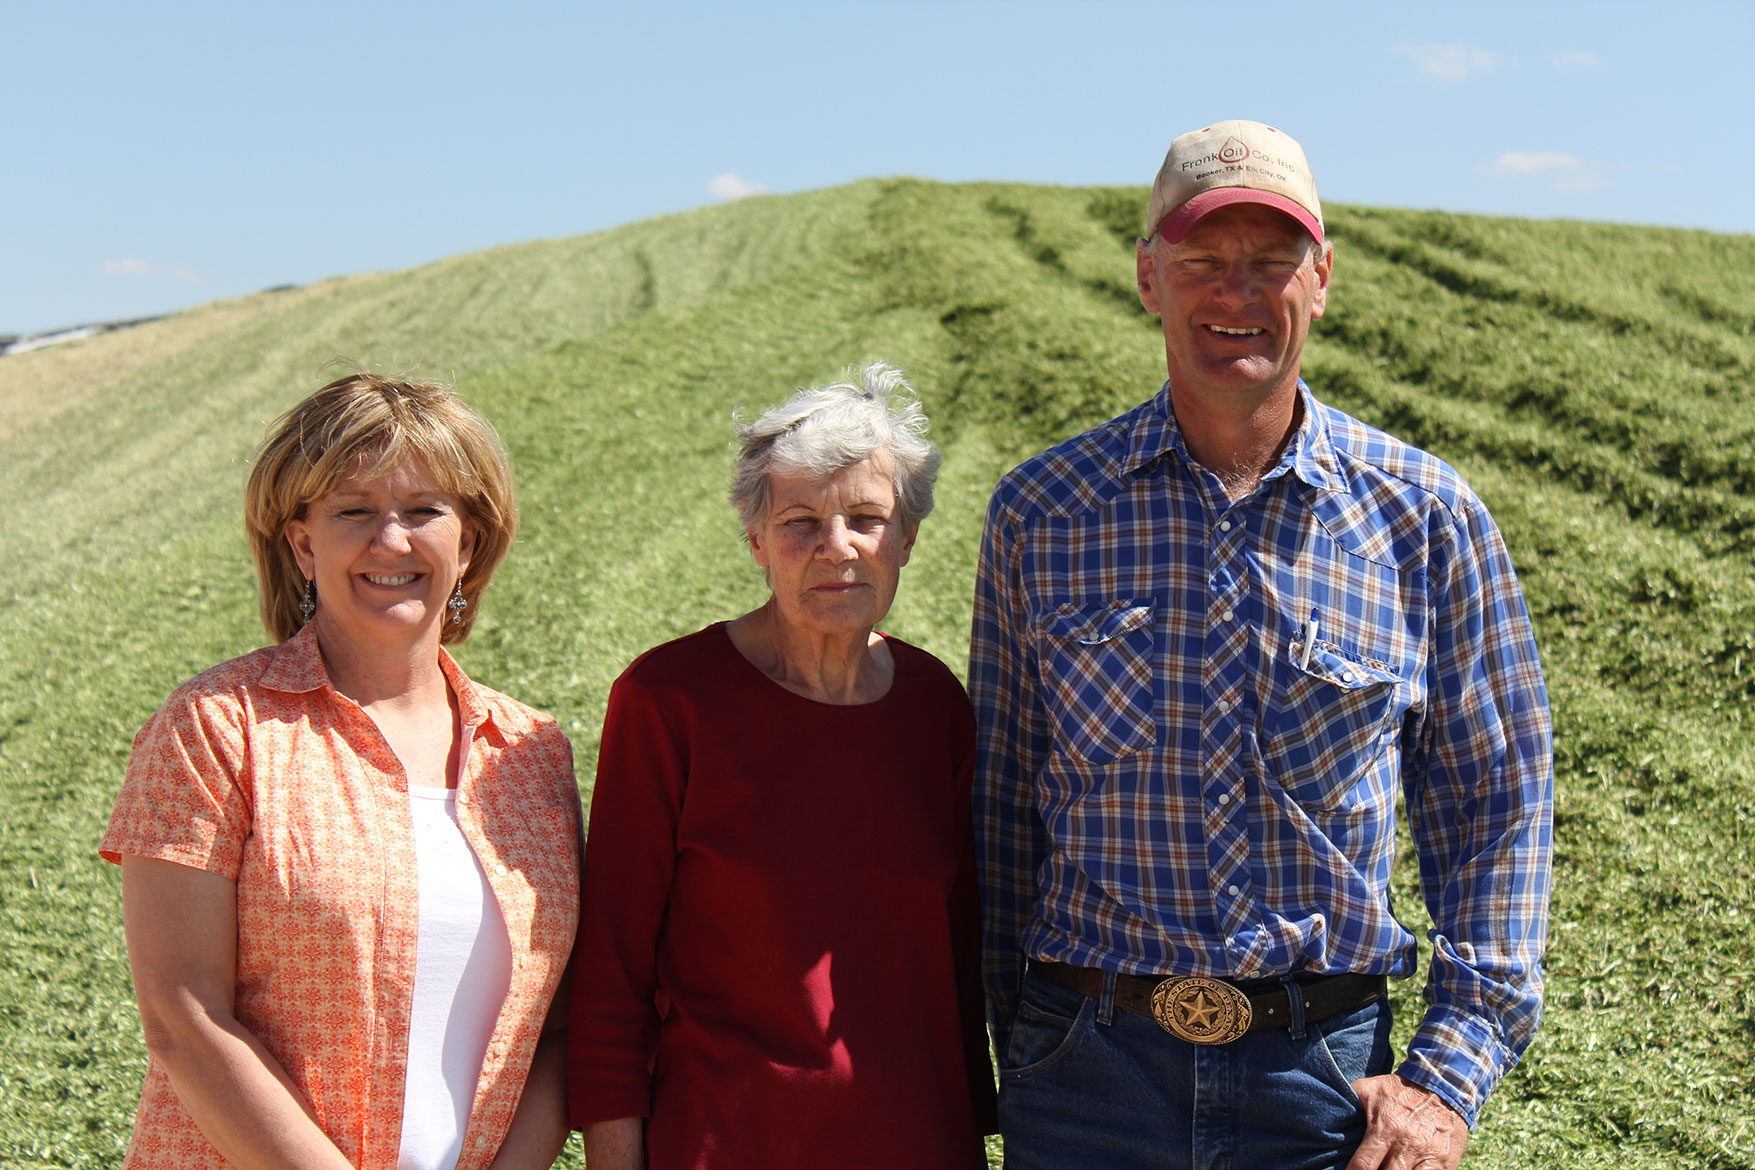 The Mellema family poses in front of the silage (chopped up corn plant) pile at their dairy.